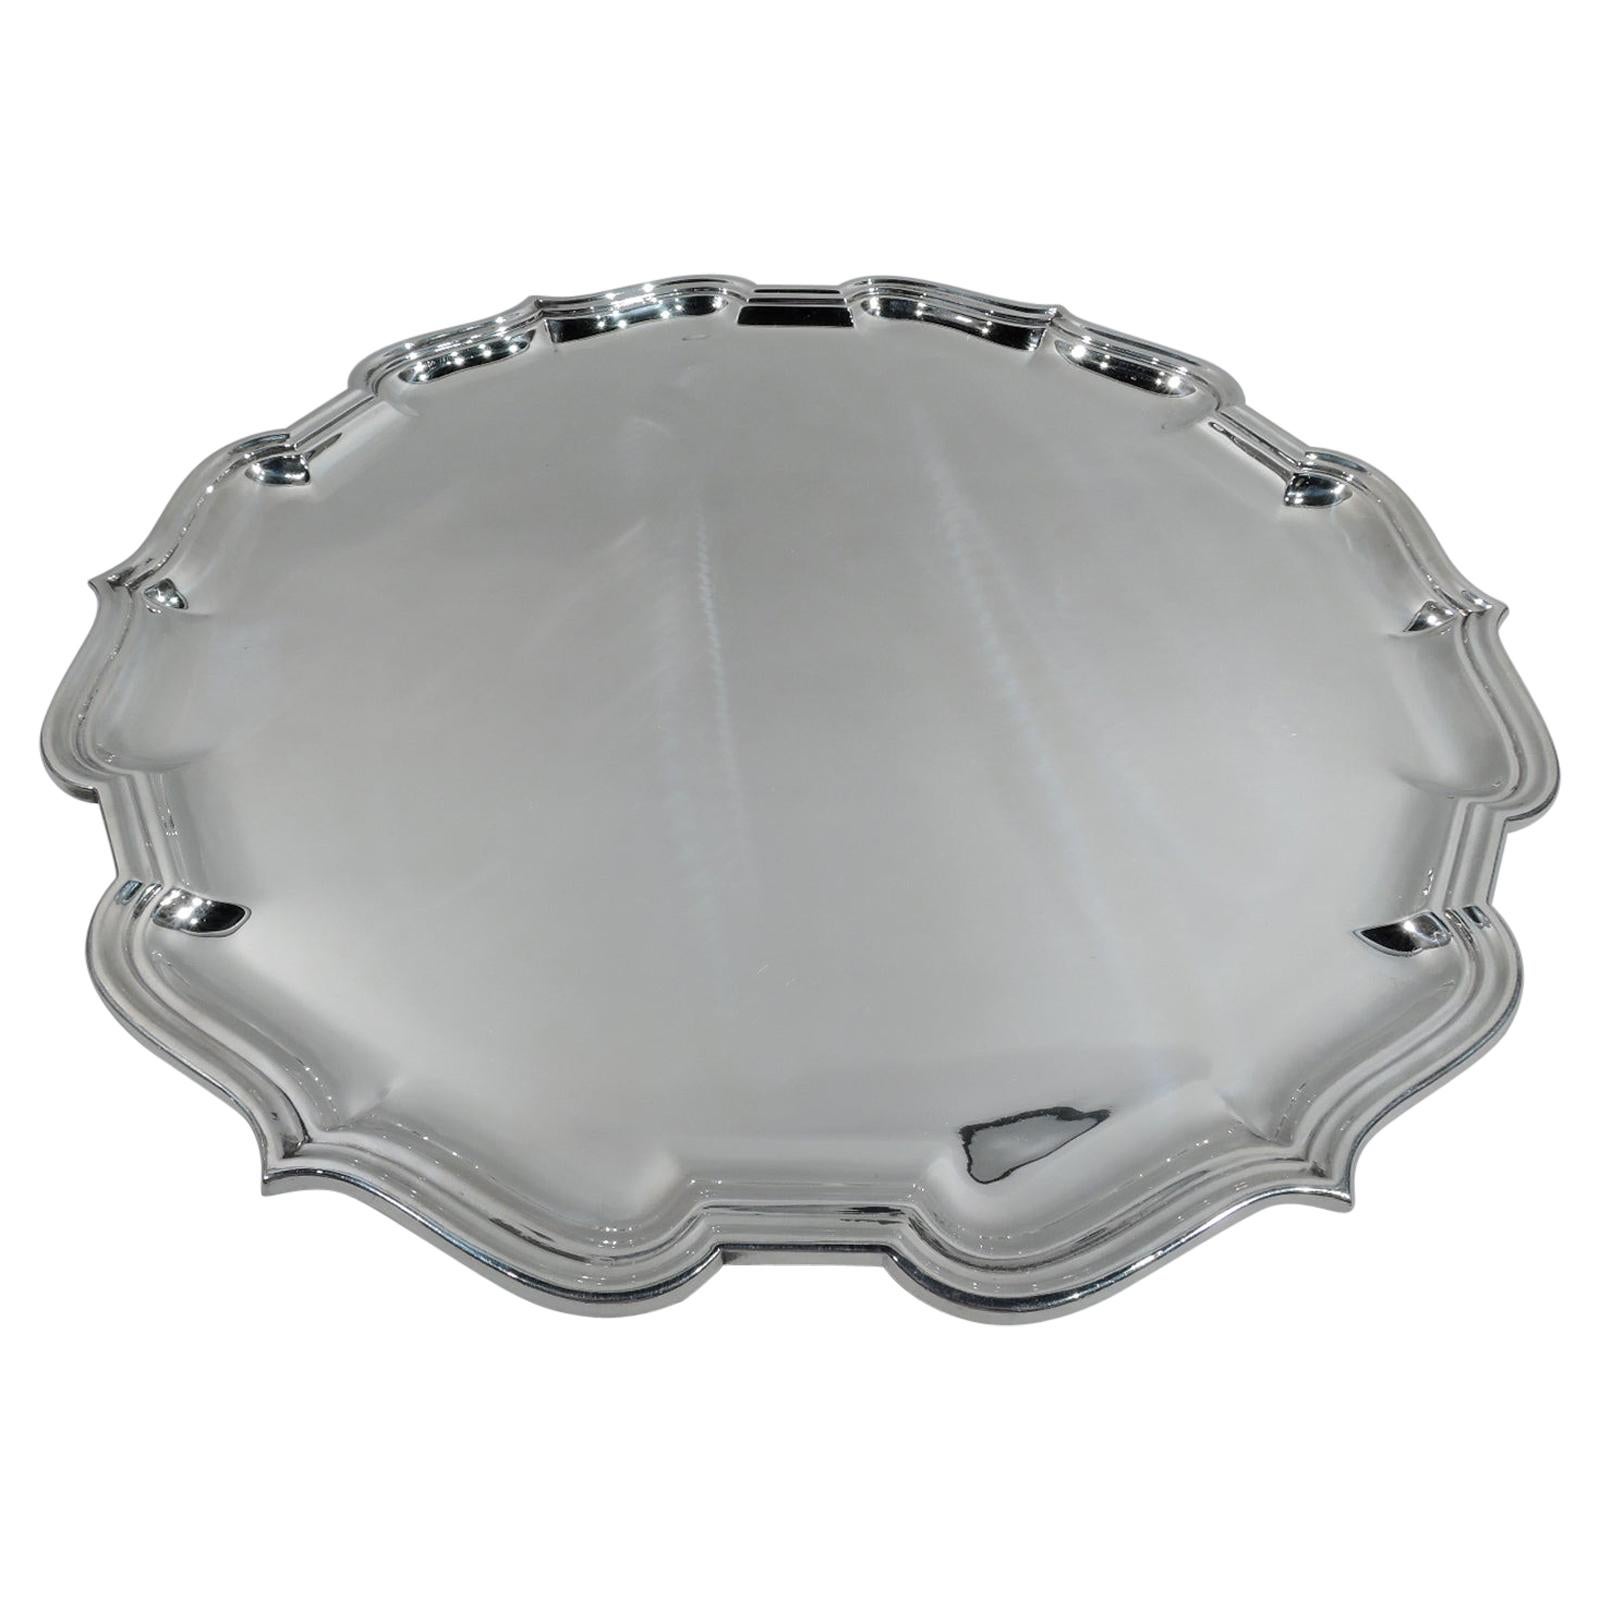 Large & Heavy English Georgian-Style Sterling Silver Salver Tray